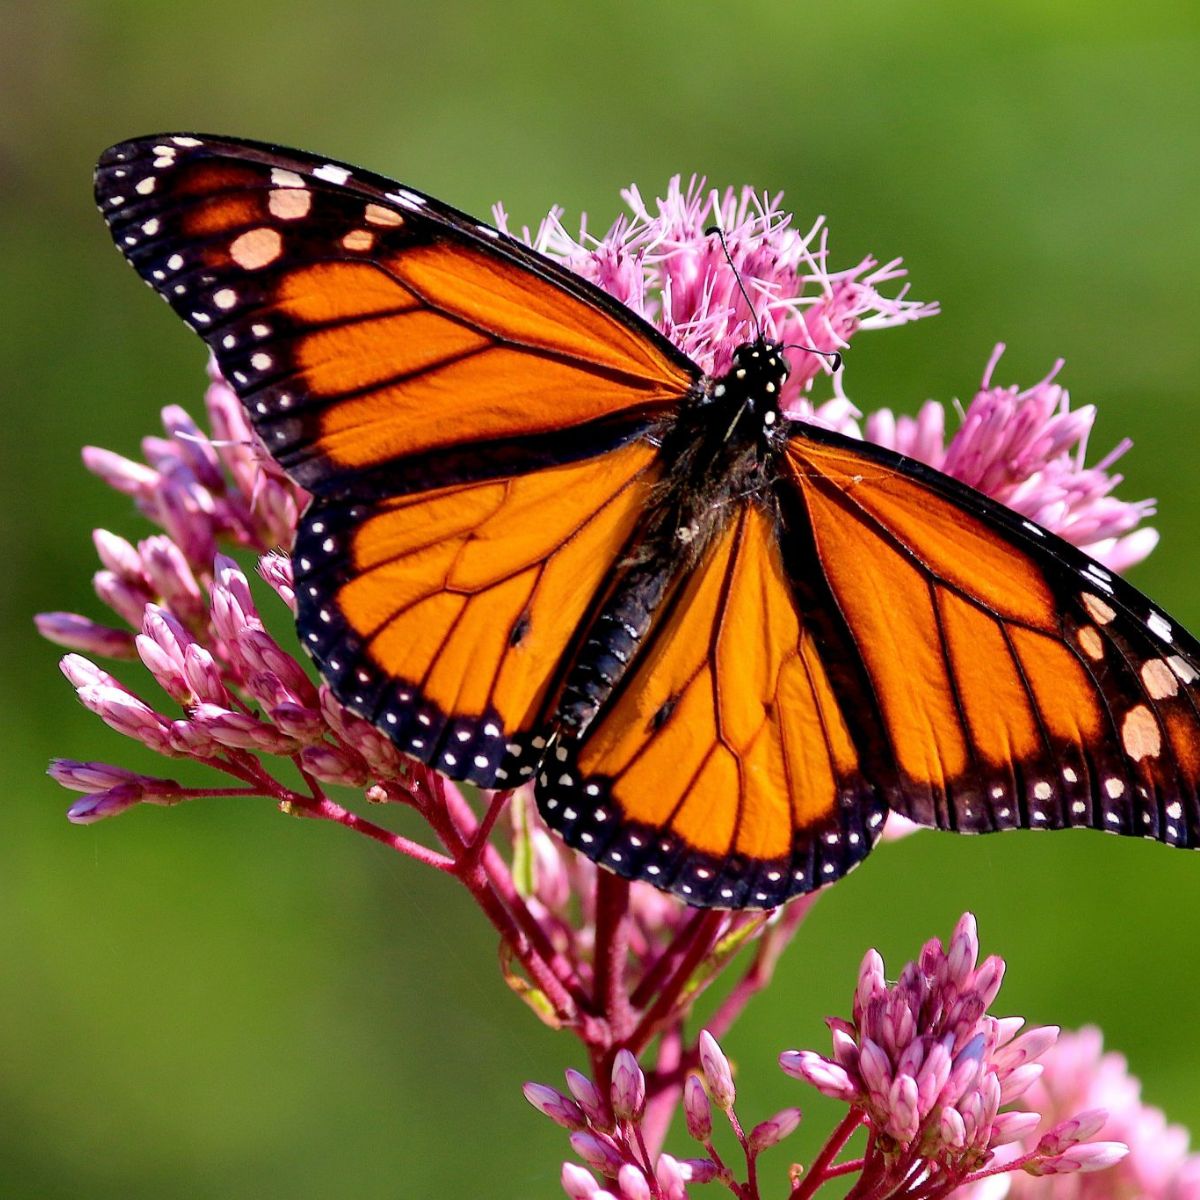 attract-butterflies-to-your-garden-with-these-5-tips-to-turn-it-into-butterfly-heaven-featured